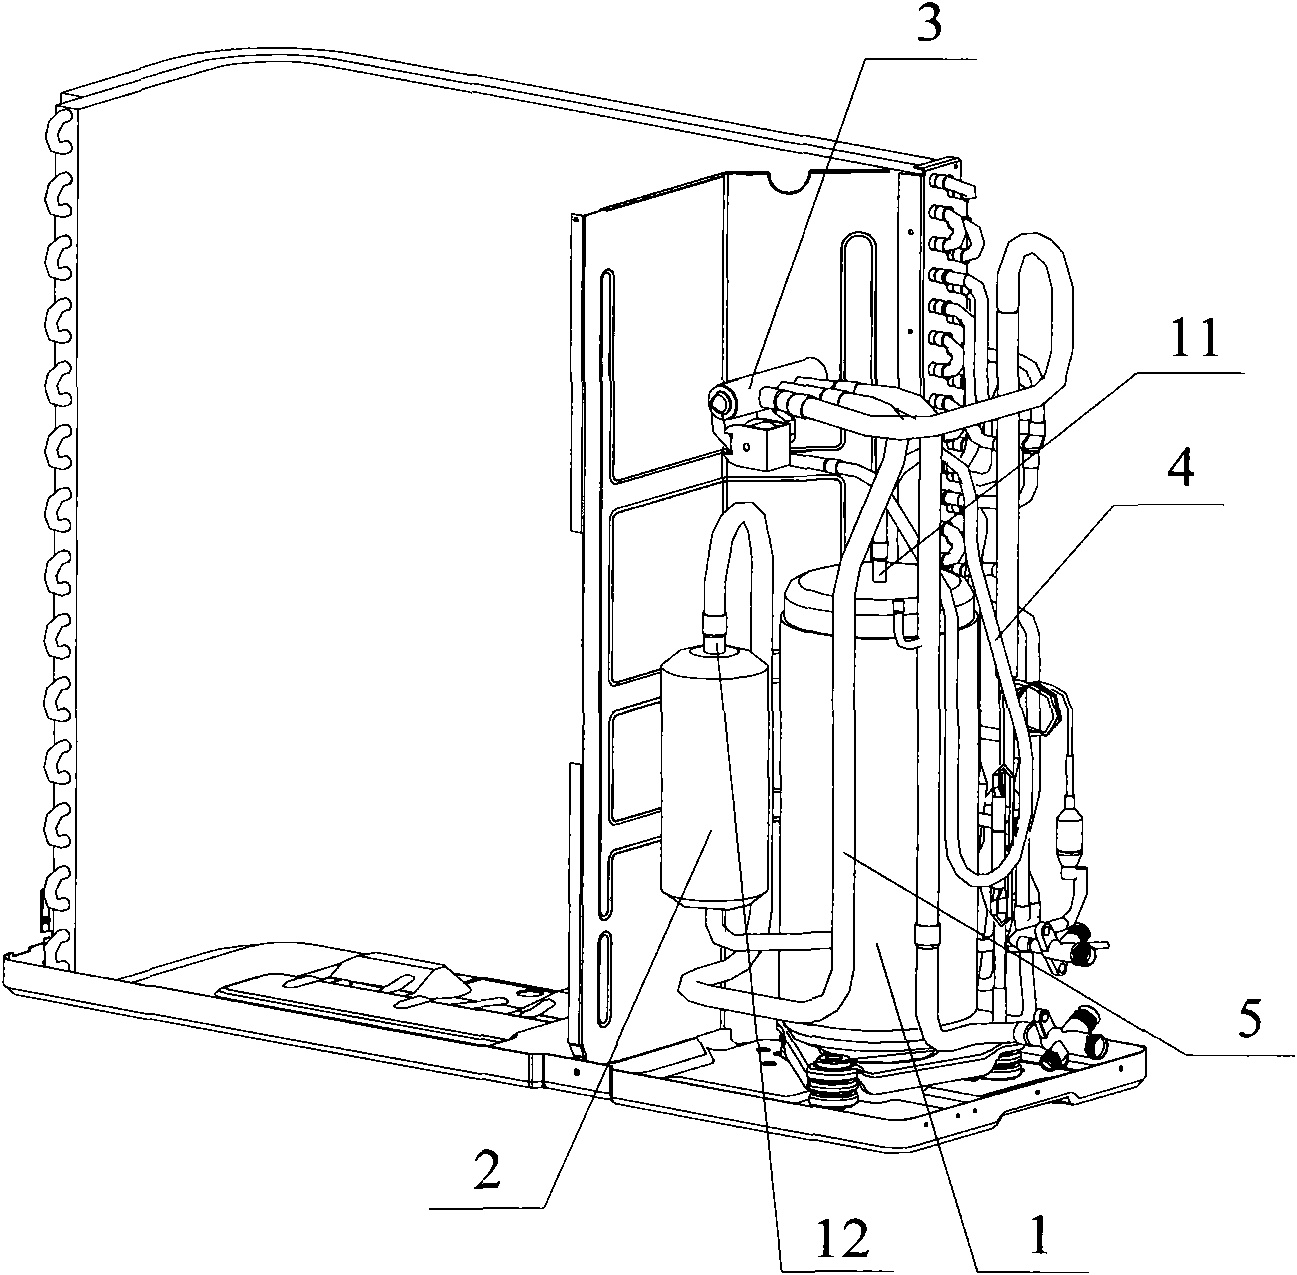 Pipeline distributing system of compressor and air conditioner with same